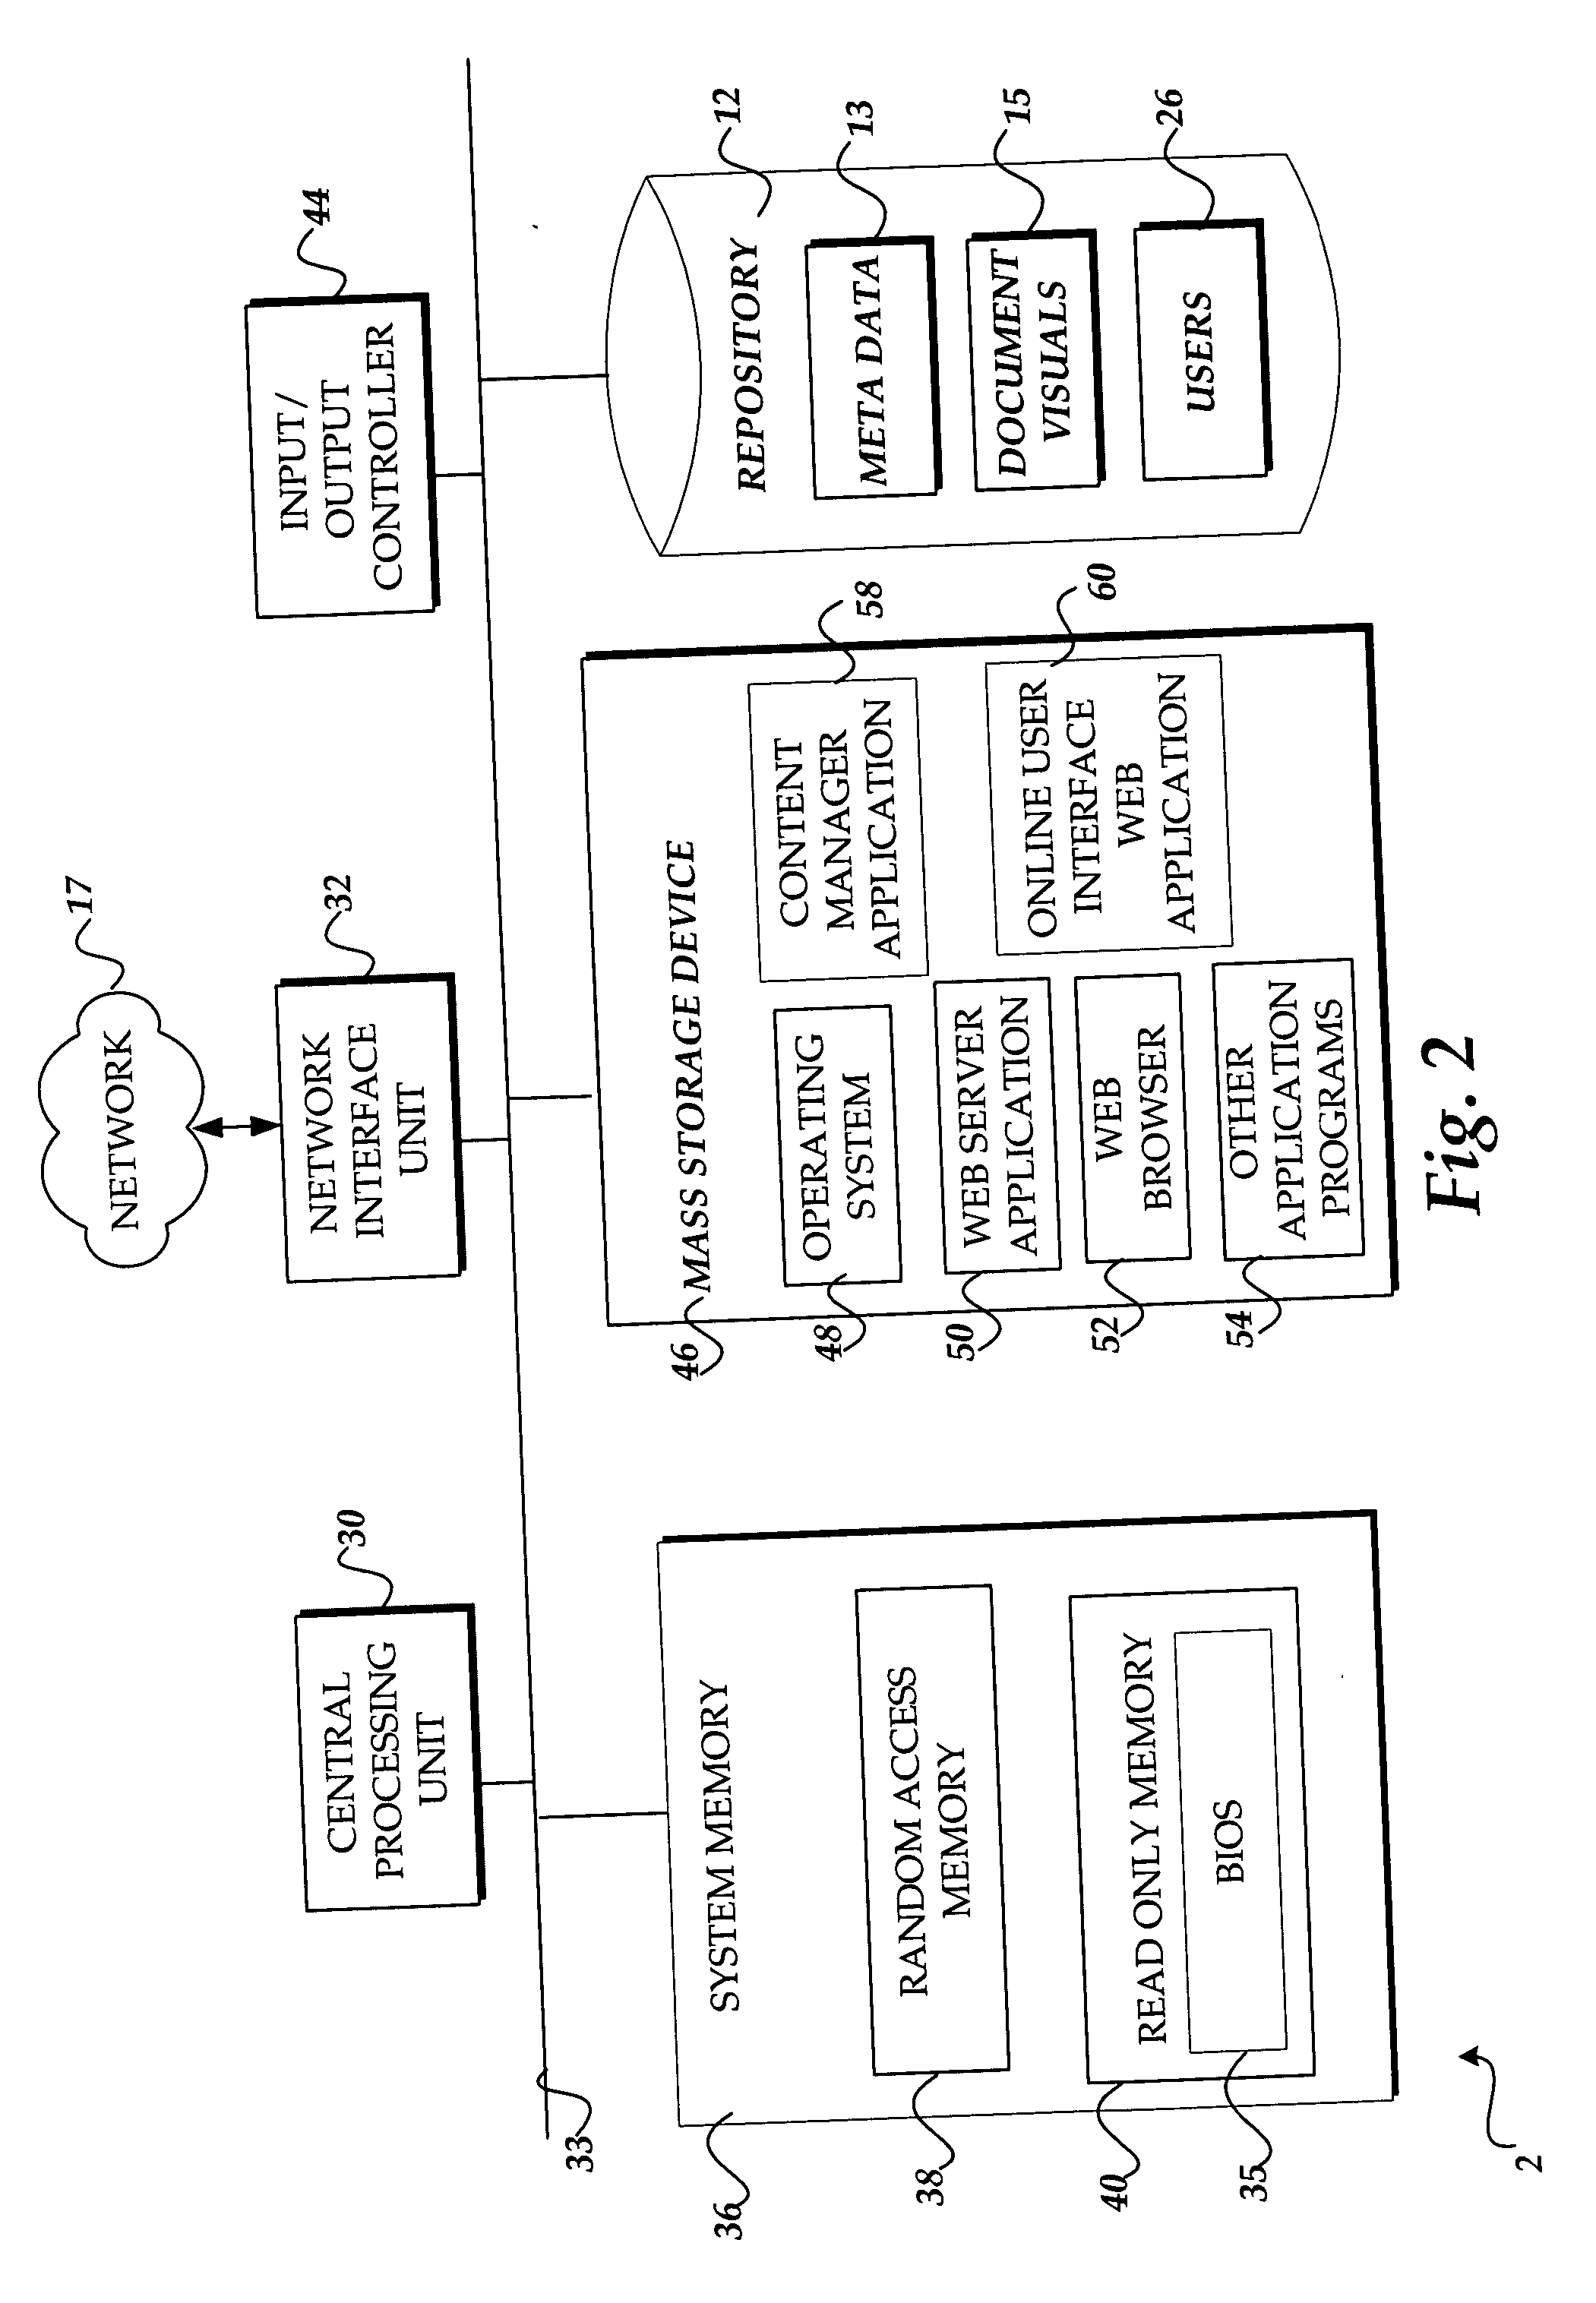 Method and system for data aggregation and retrieval